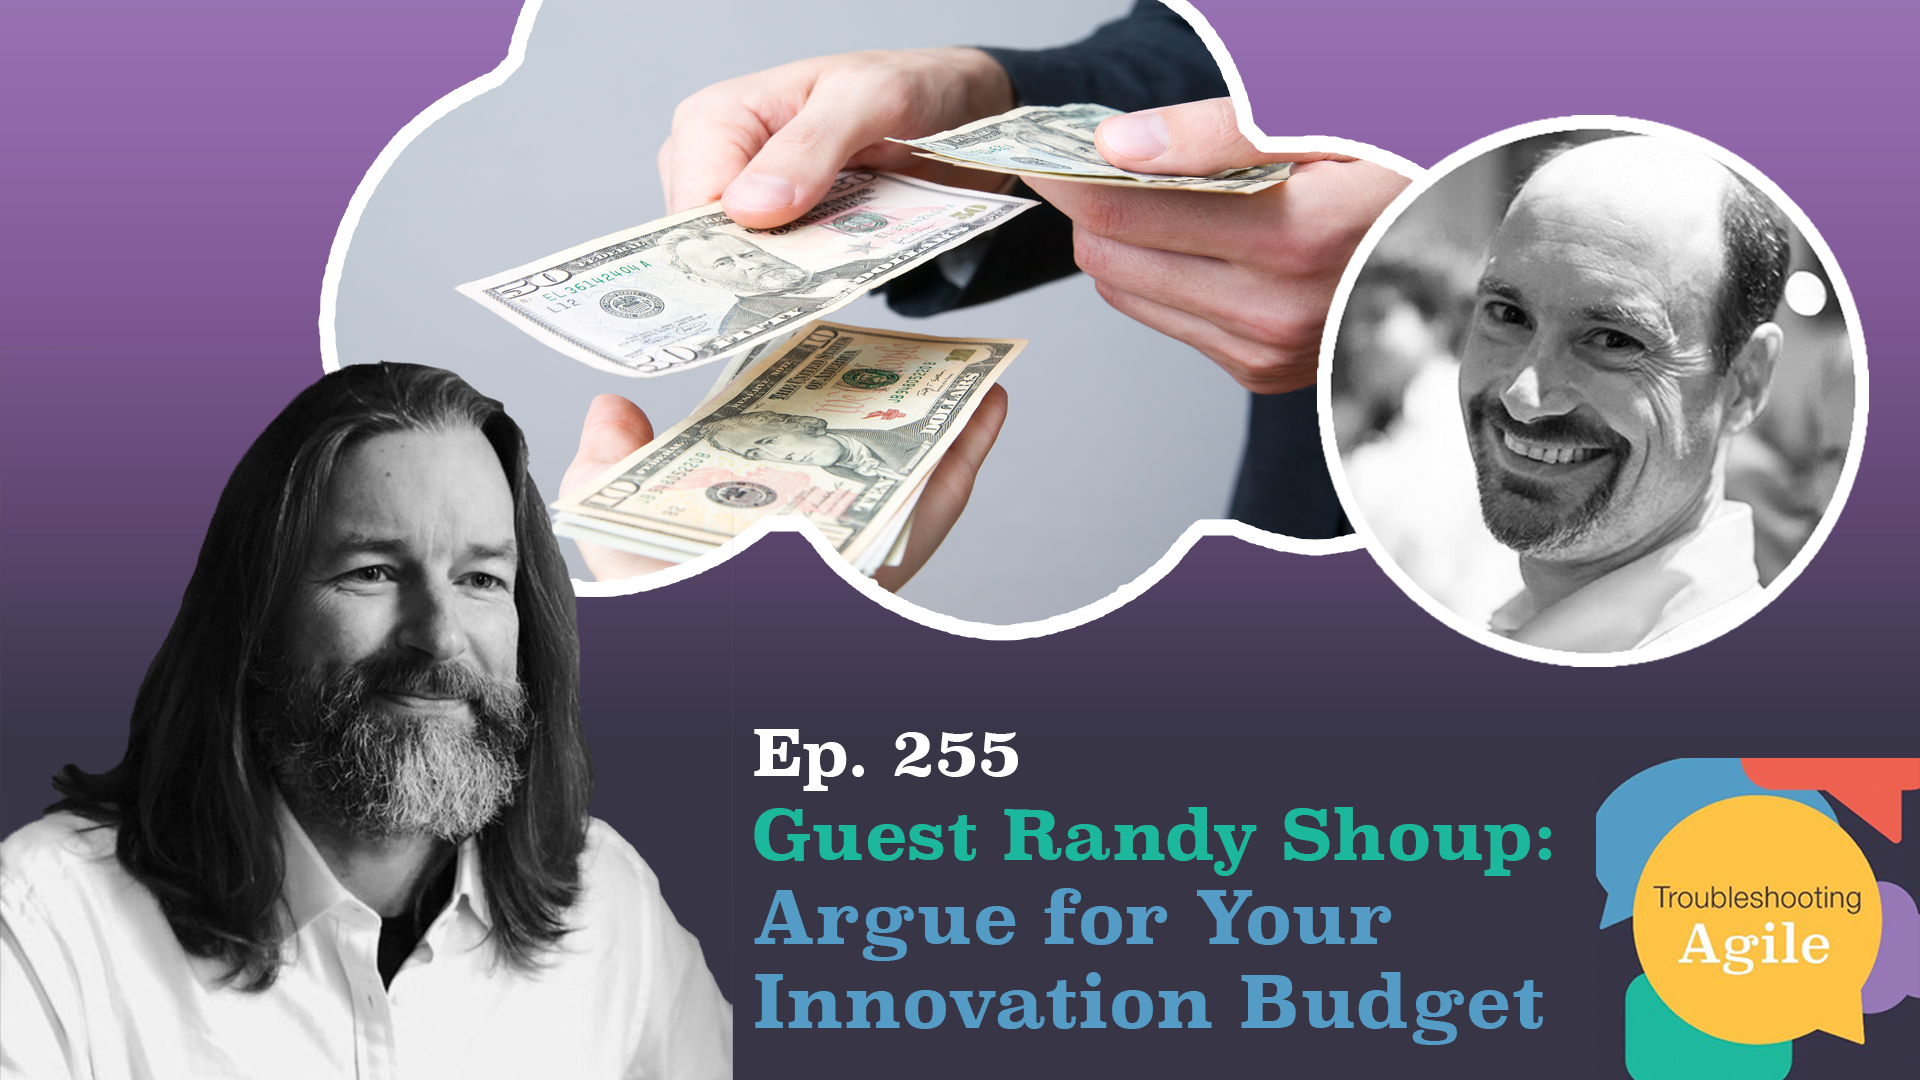 Argue for Your Innovation Budget, with Randy Shoup